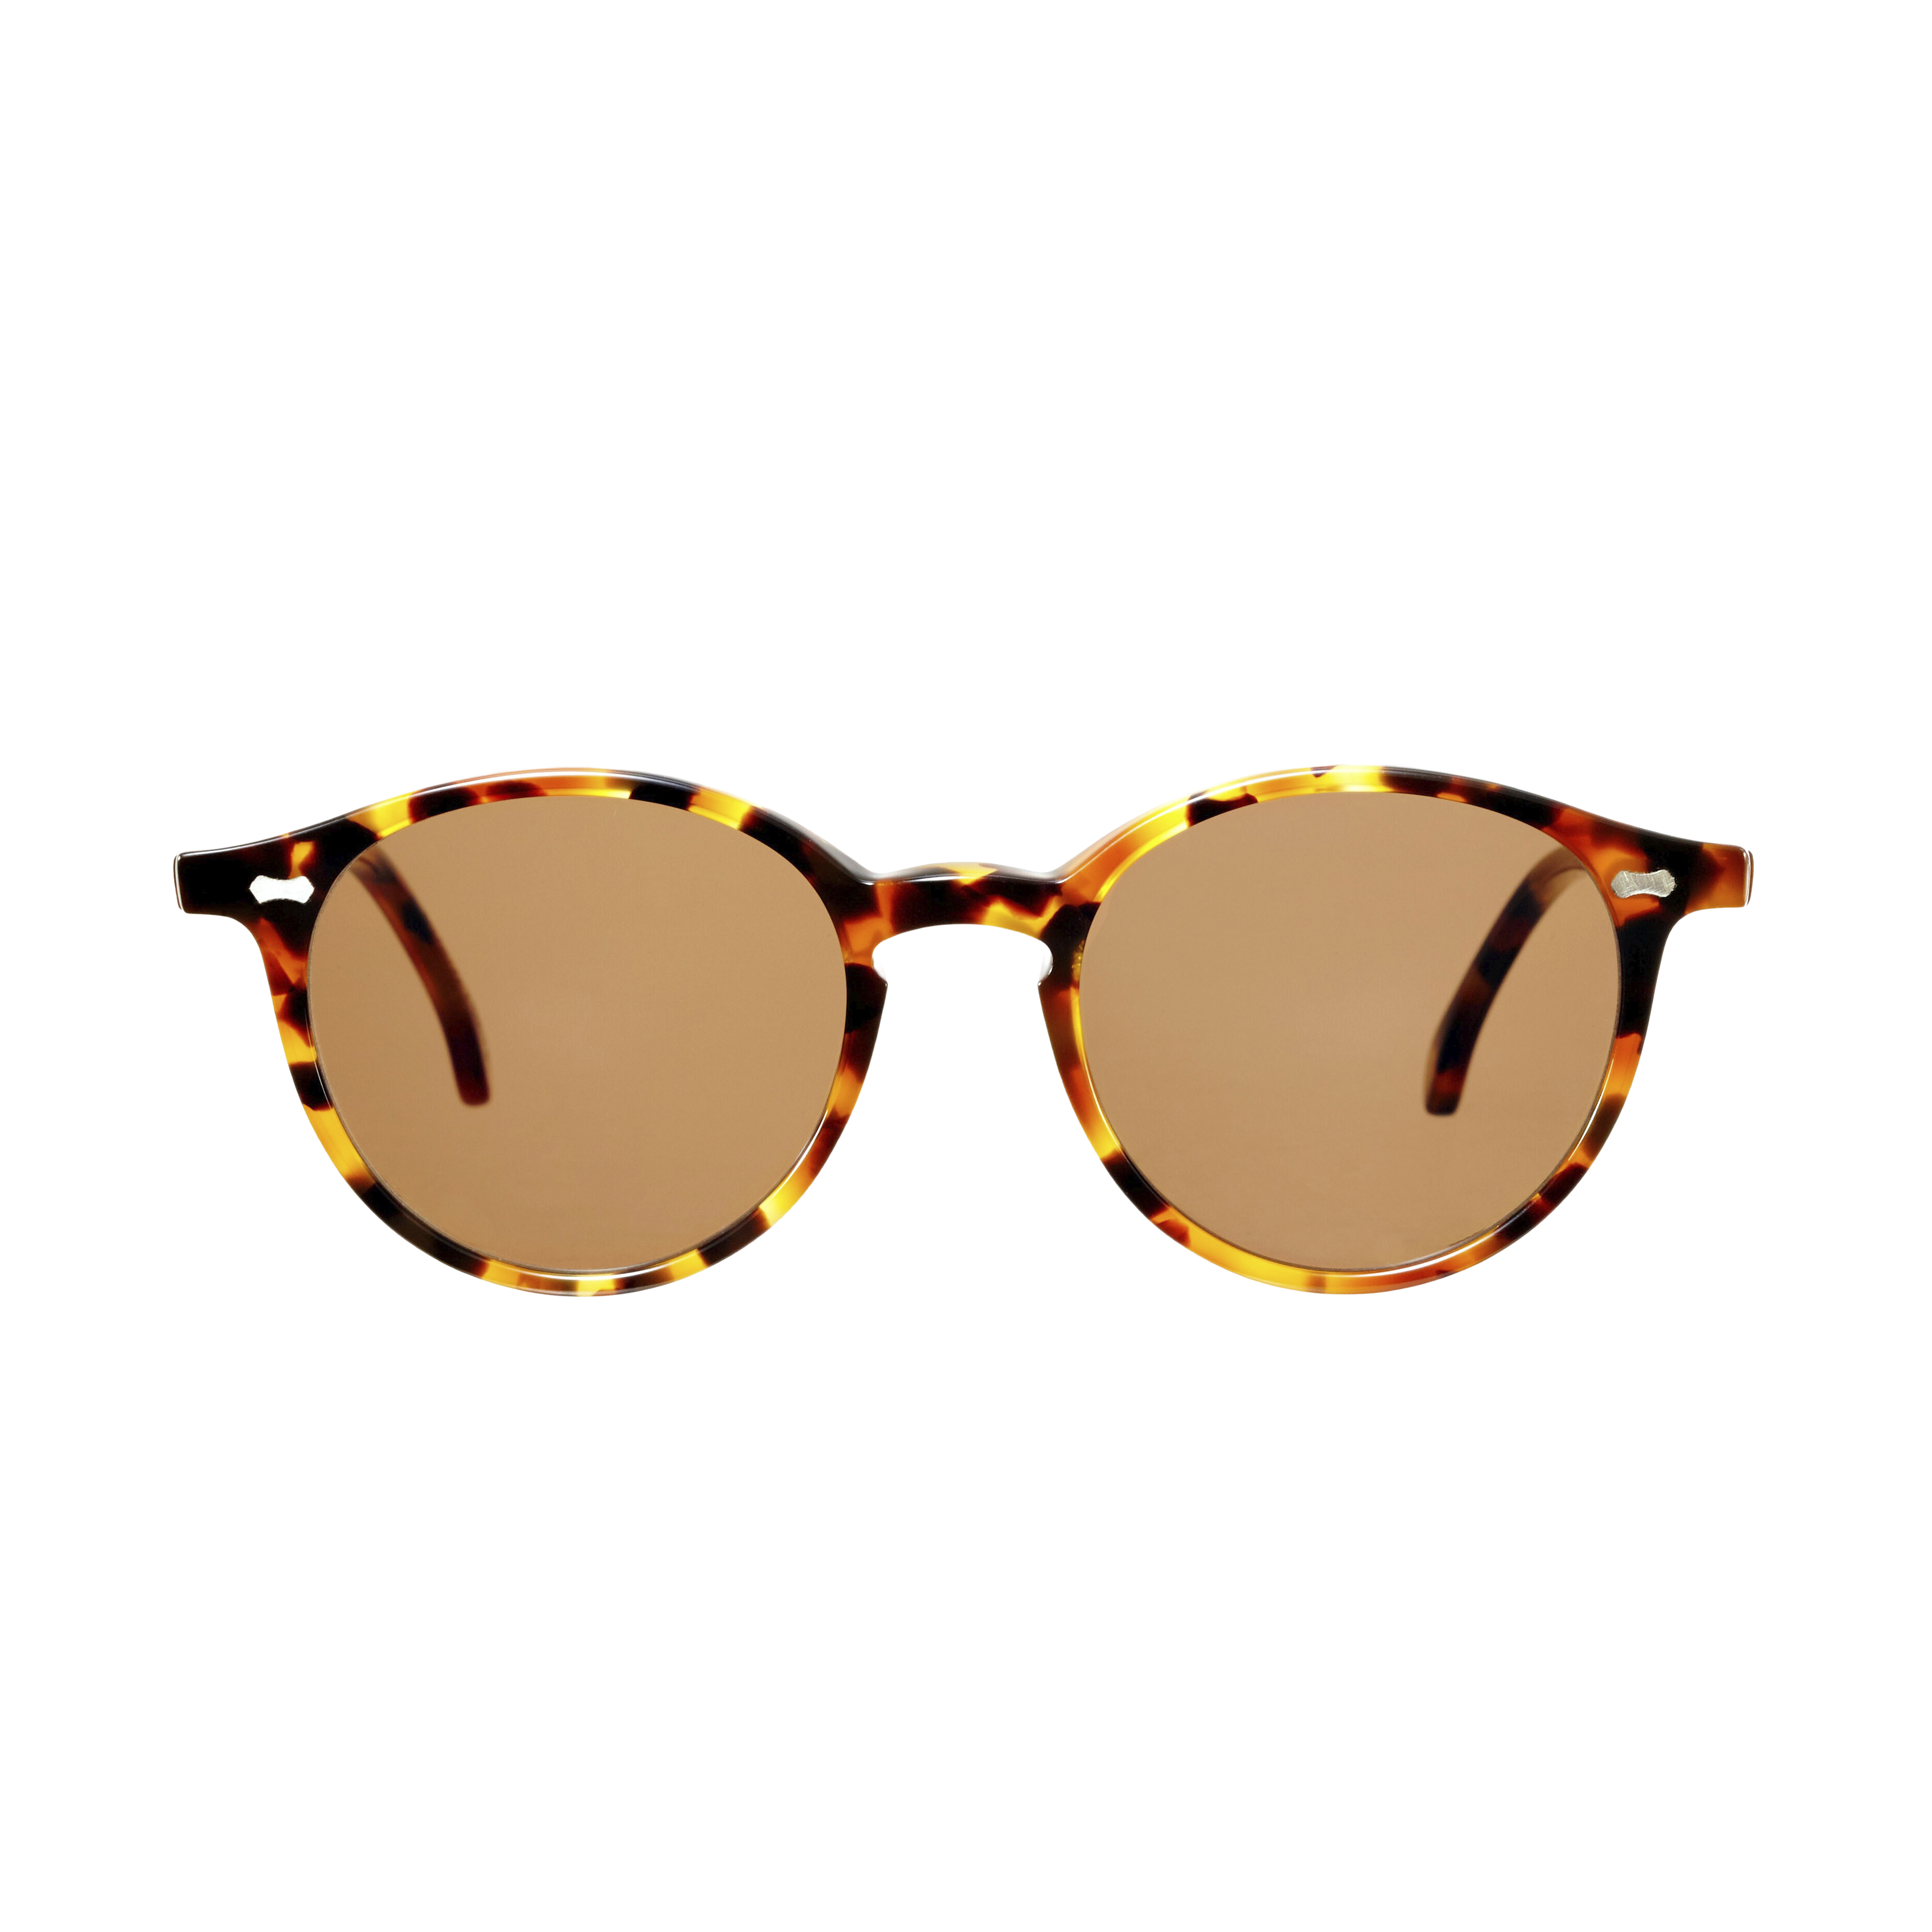 A pair of Cran Amber Tortoise Tobacco Lenses sunglasses handmade in Italy by The Bespoke Dudes on a white background.